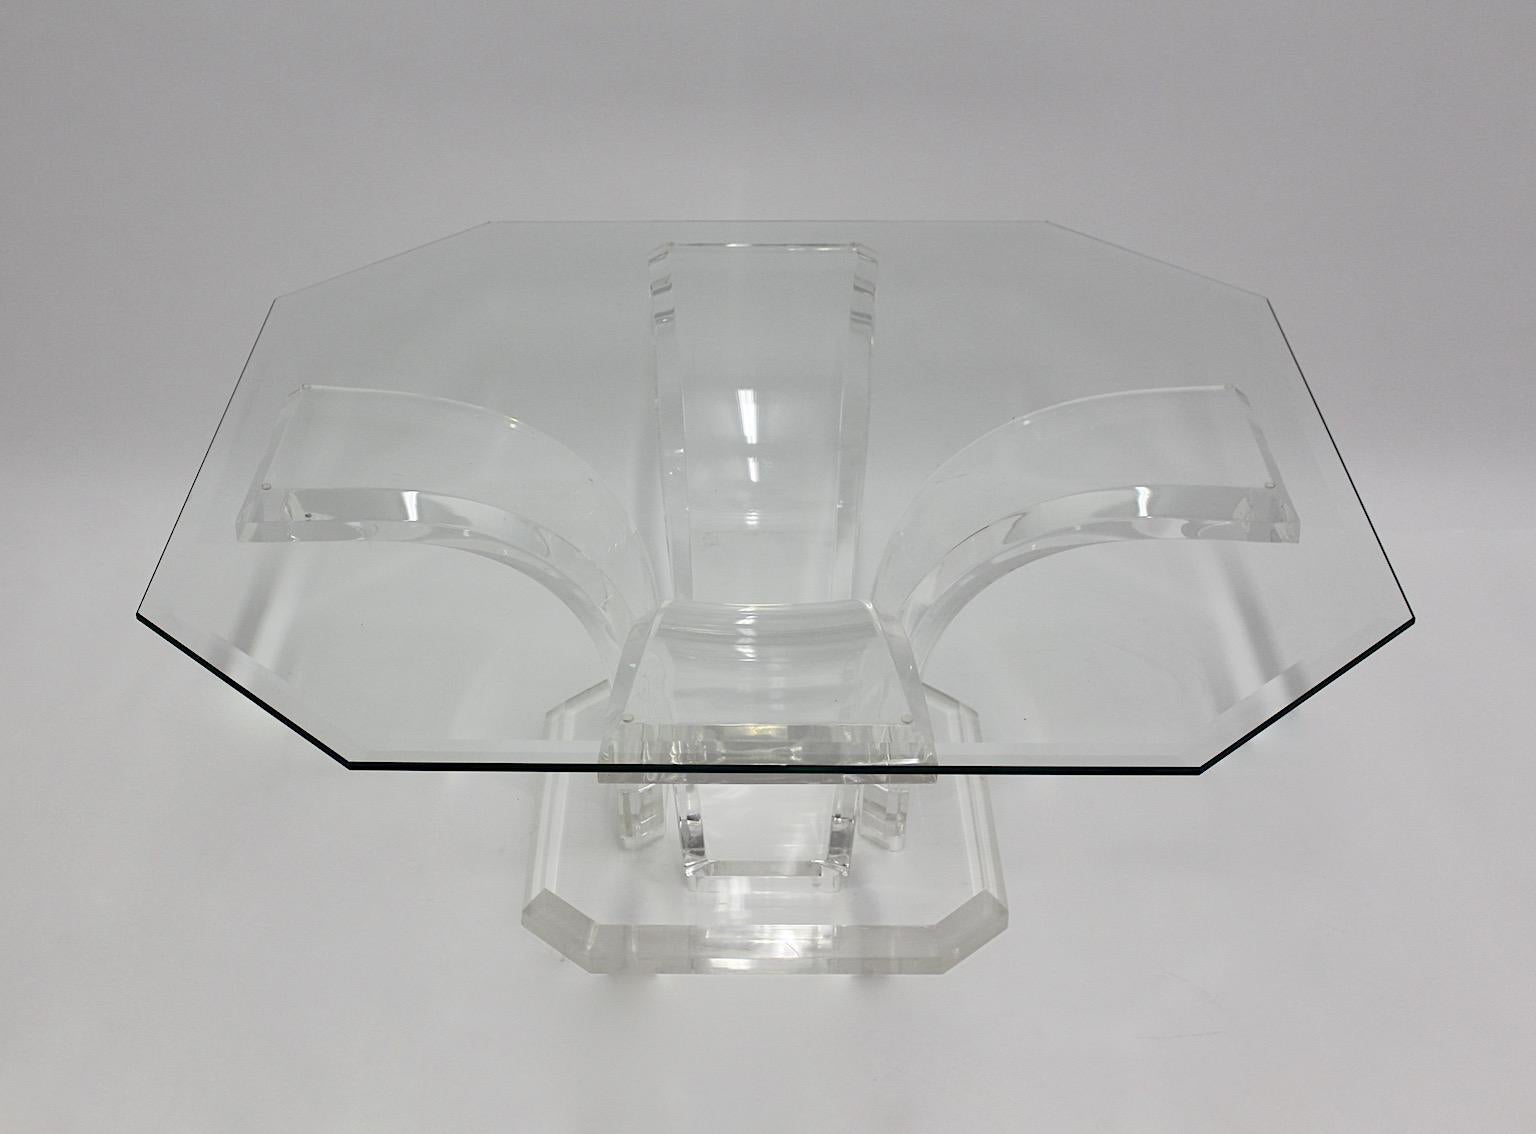 Space Age Vintage Rectangular Transparent Lucite Glass Coffee Table circa 1970 im Angebot 6